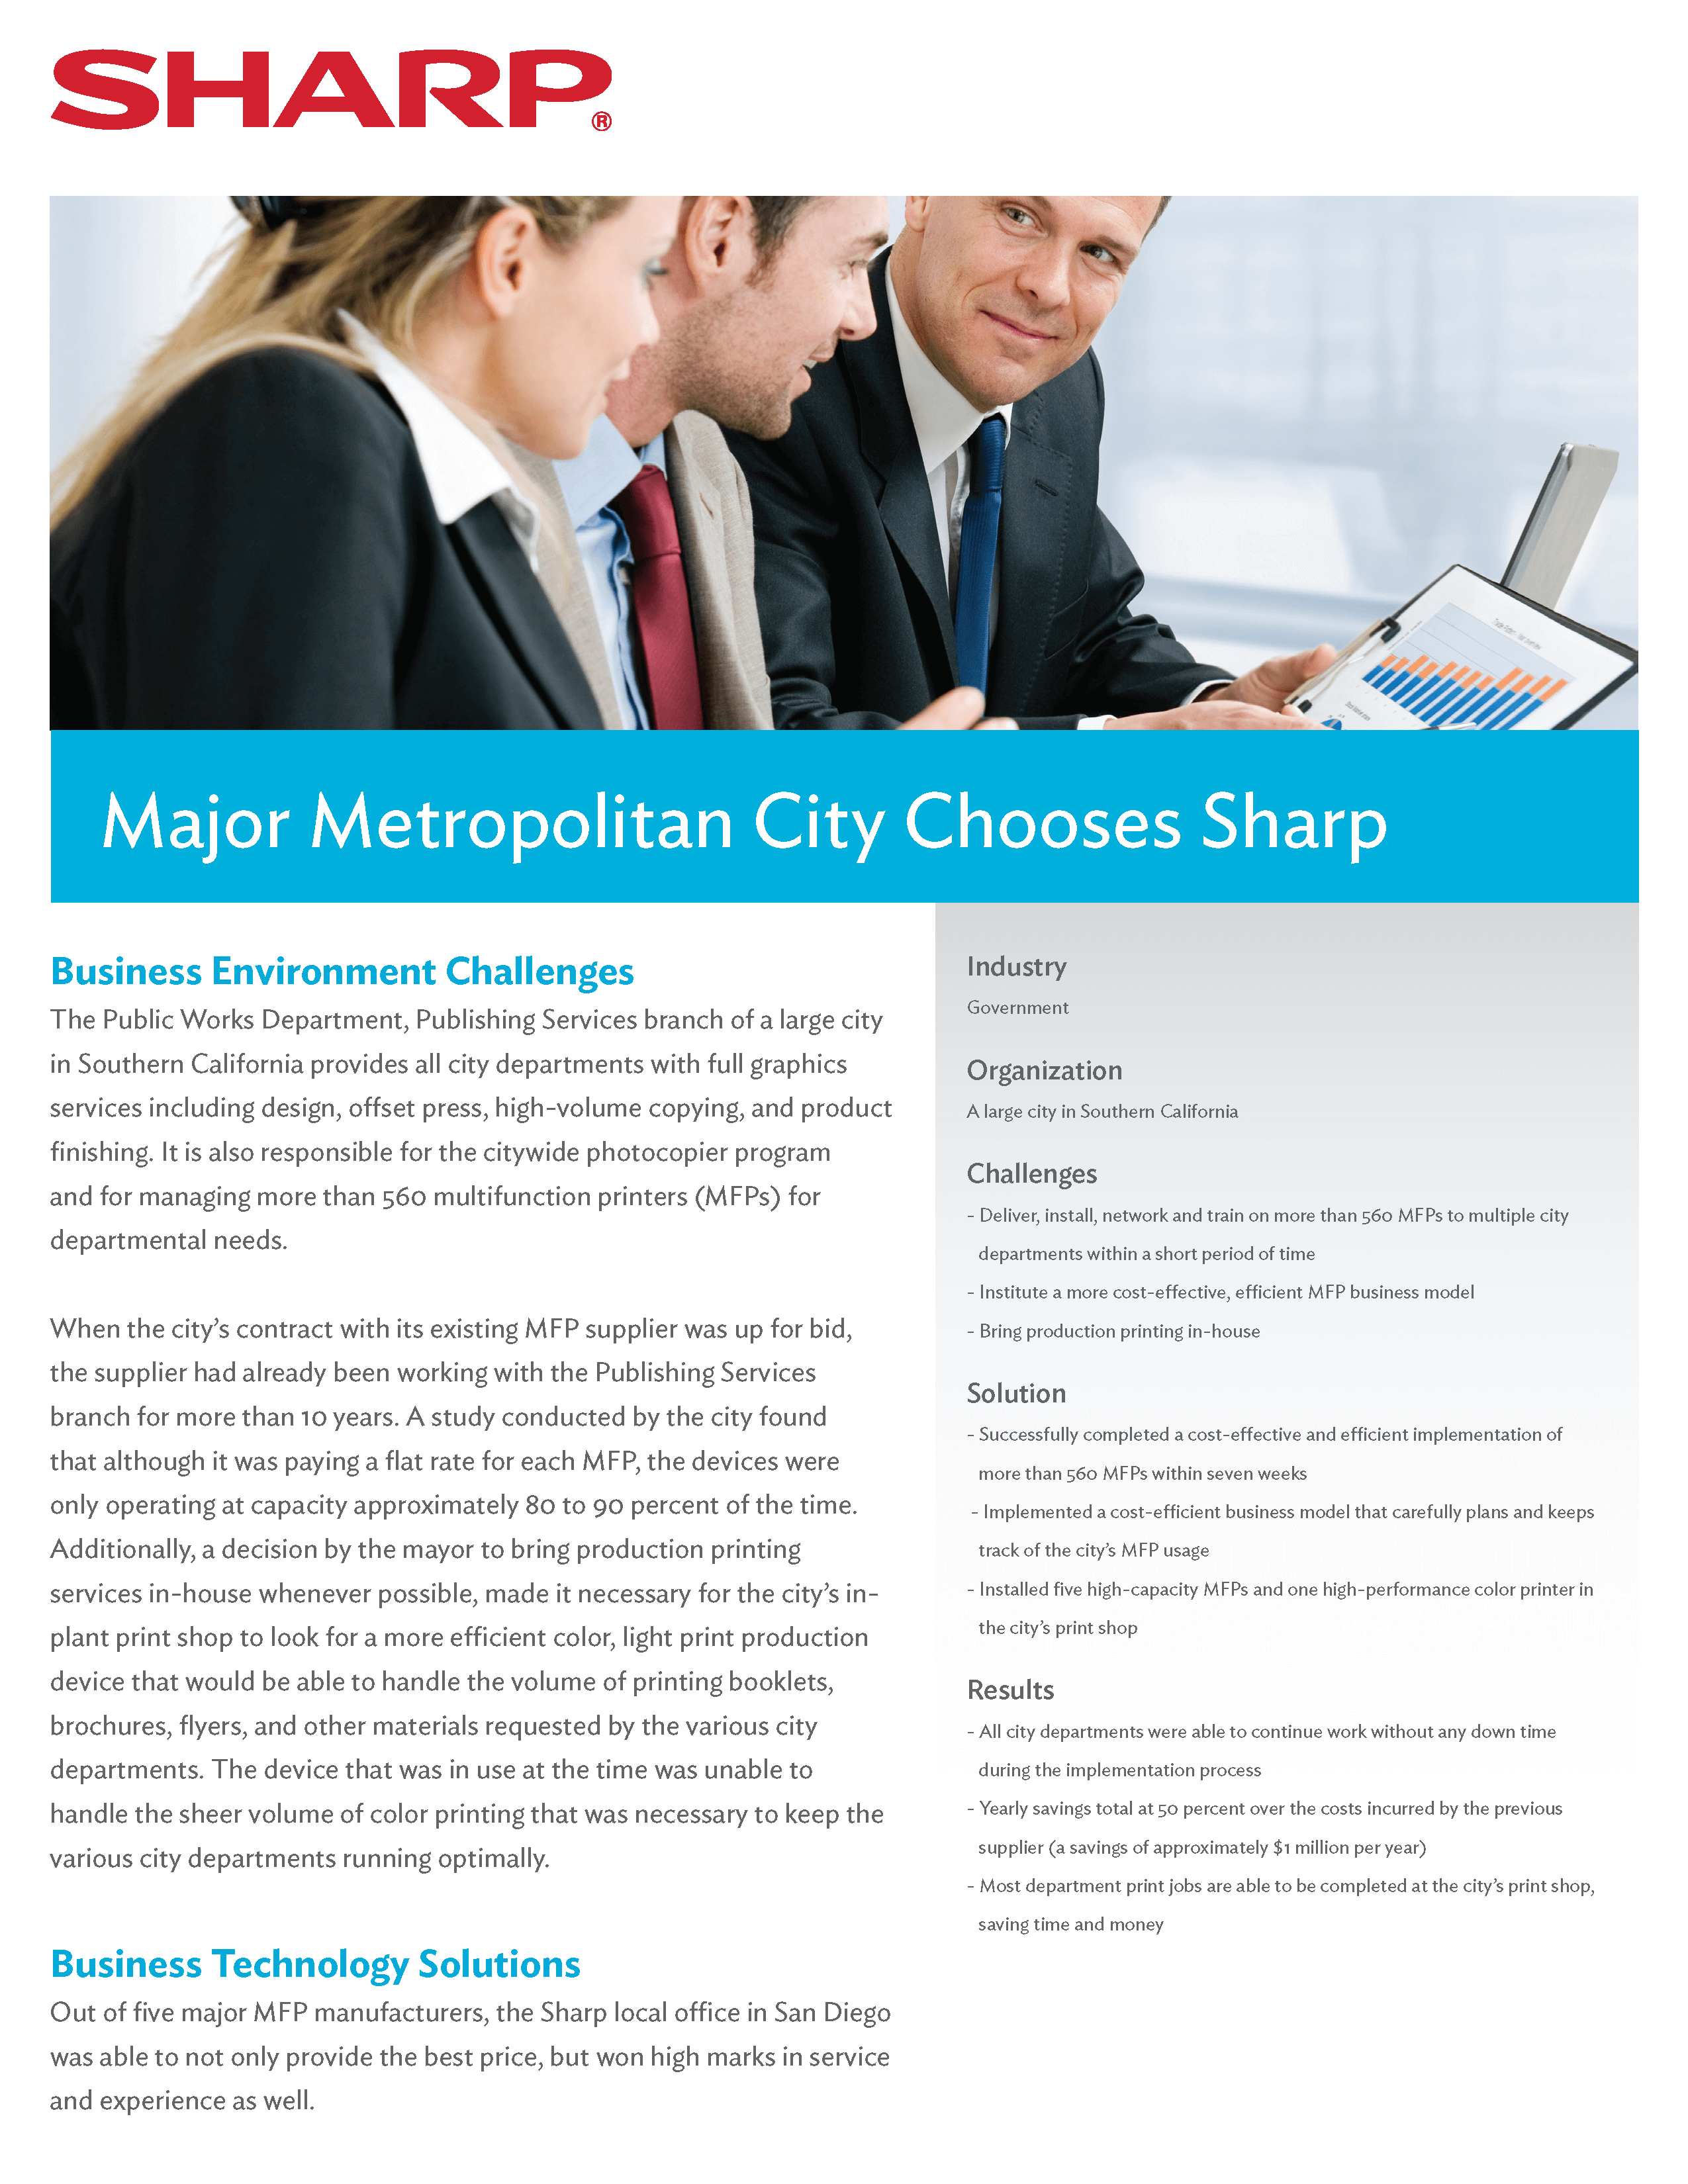 Metropolitan city saves 50% over the cost incurred by the previous supplier